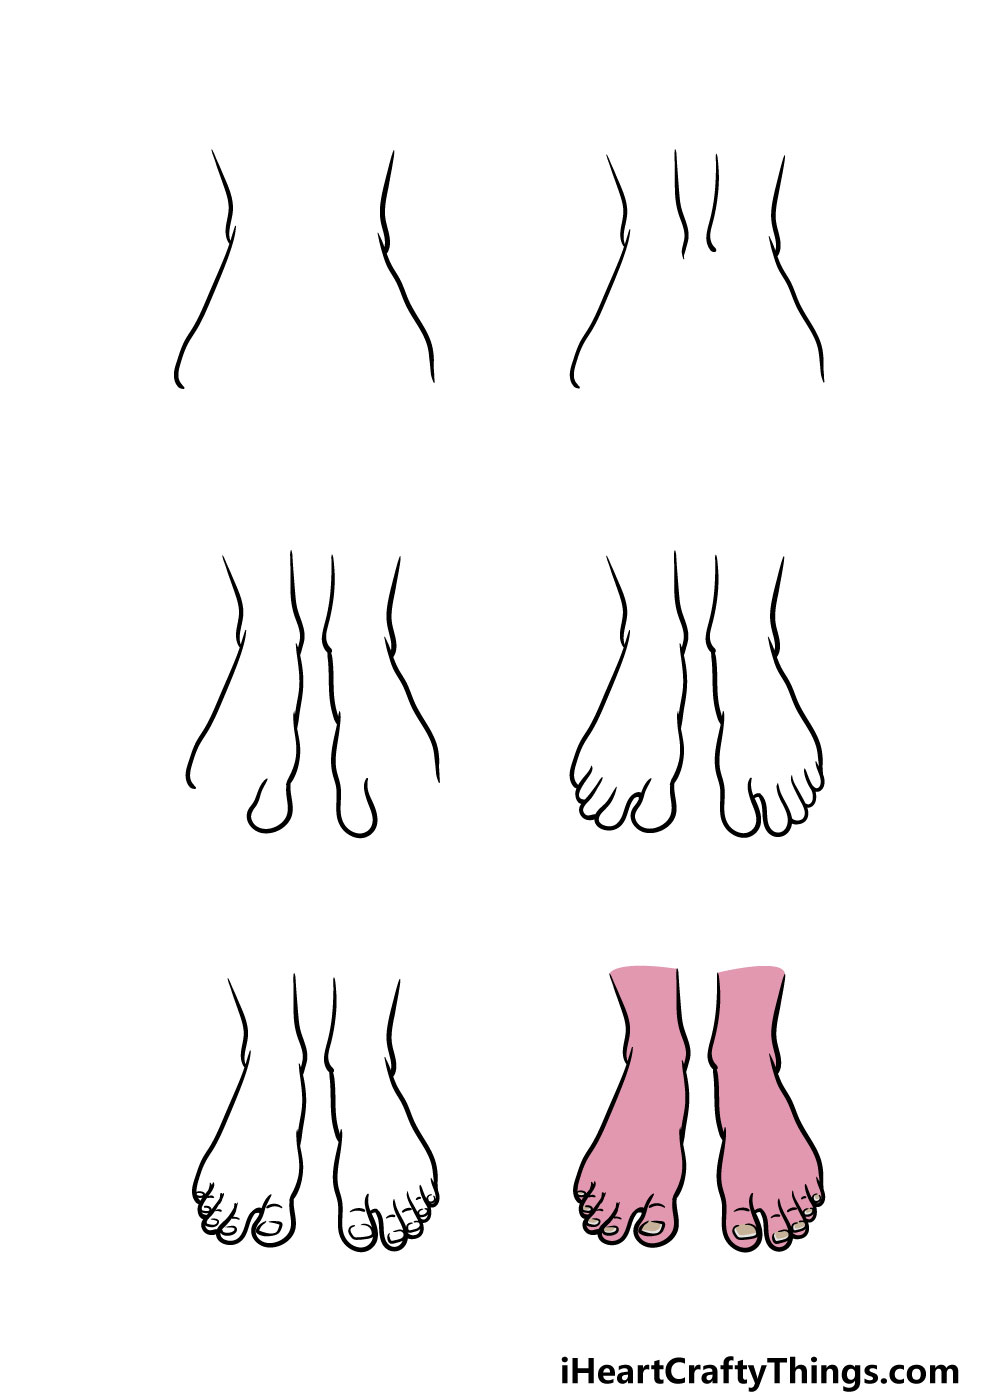 how to draw feet in 6 steps